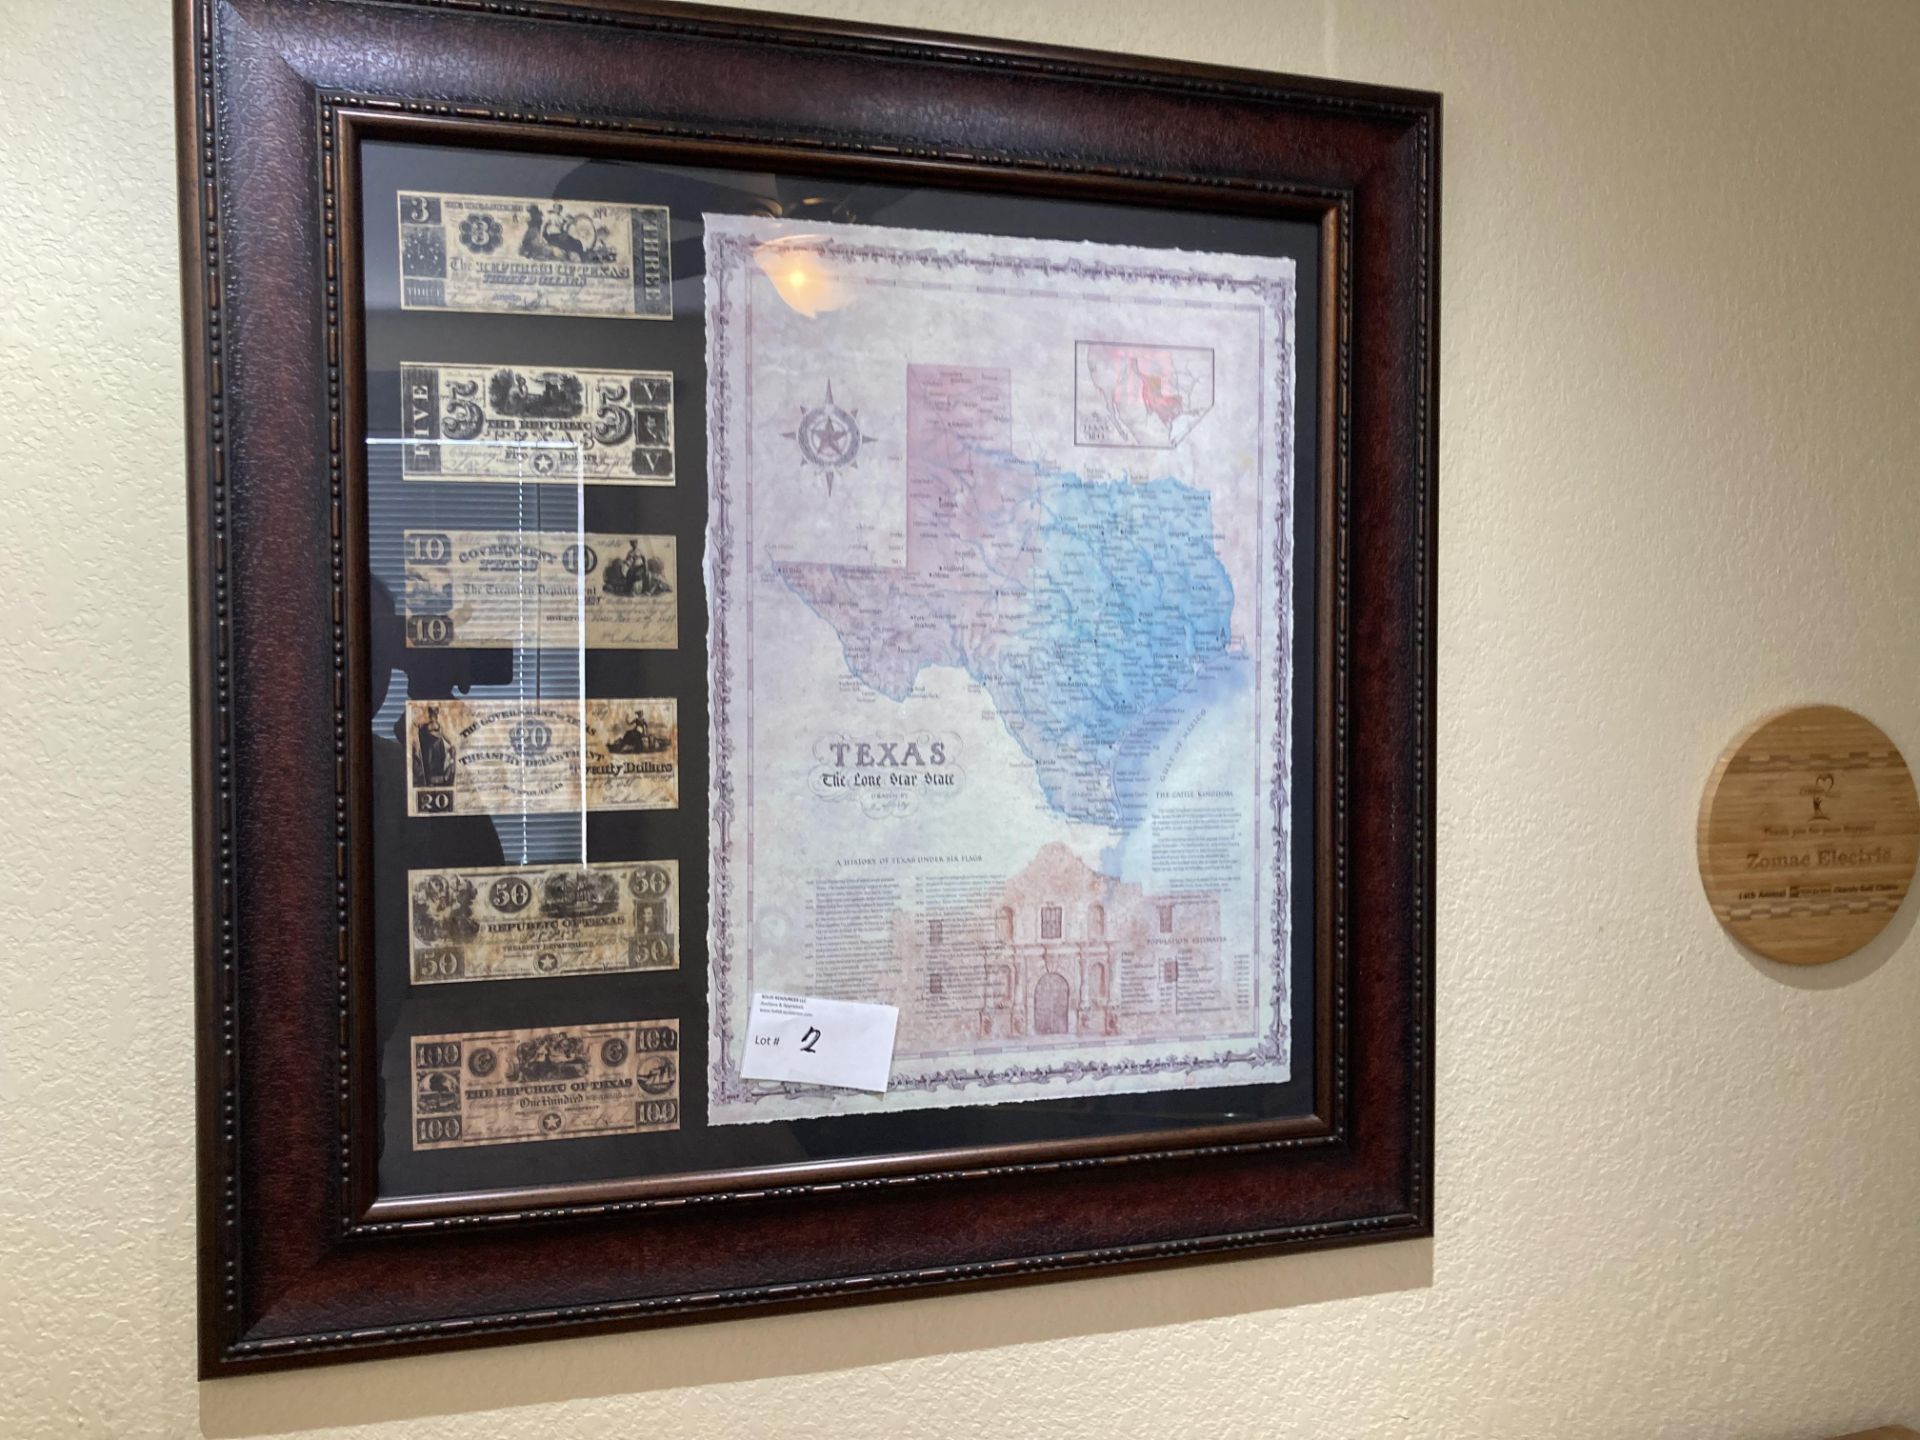 Texas map with several bills from the republic of Texas